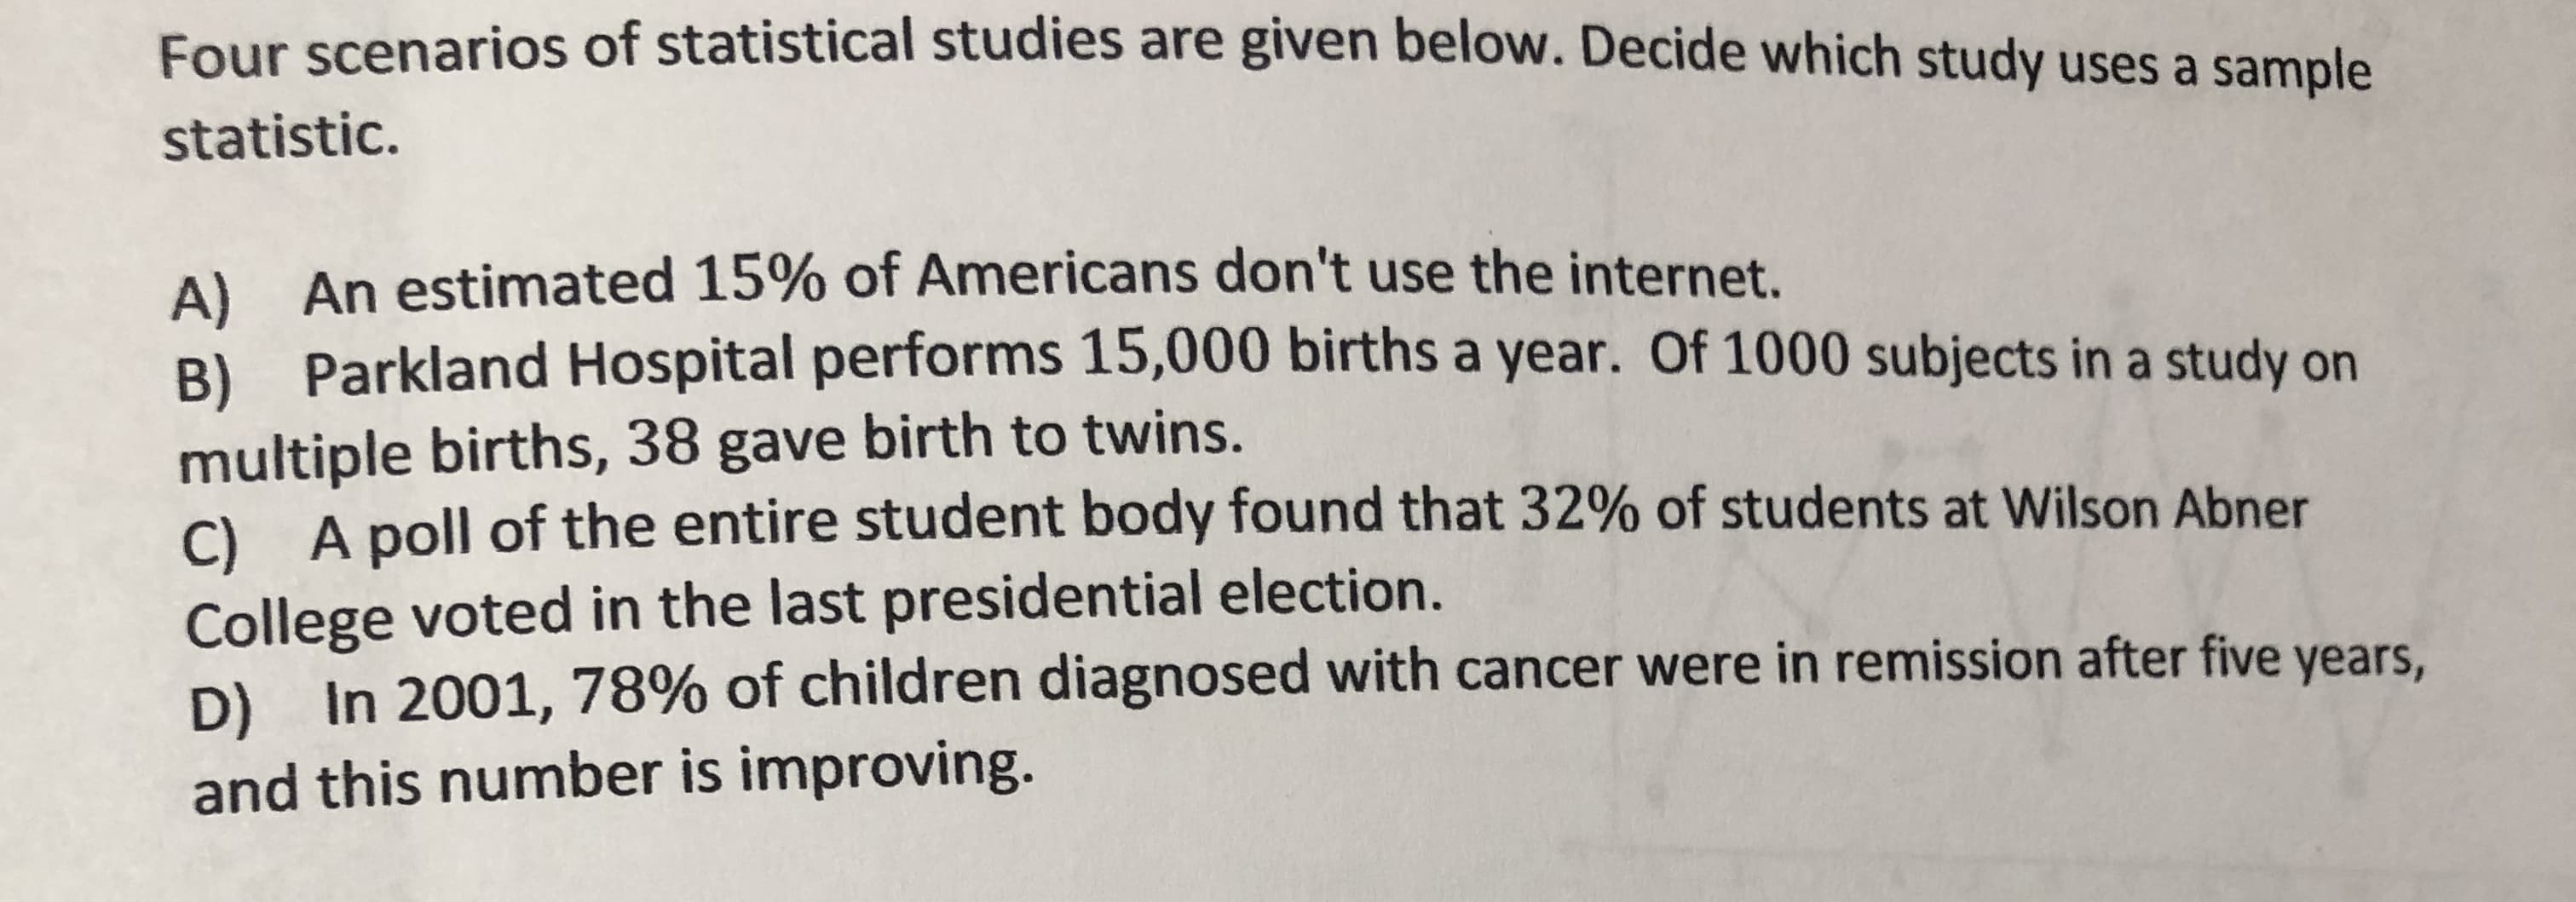 Four scenarios of statistical studies are given below. Decide which study uses a sample
statistic.
A) An estimated 15% of Americans don't use the internet.
B) Parkland Hospital performs 15,000 births a year. Of 1000 subjects in a study on
multiple births, 38 gave birth to twins.
). A poll of the entire student body found that 32% of students at Wilson Abner
College voted in the last presidential election.
D) In 2001, 78% of children diagnosed with cancer were in remission after five years,
and this number is improving.
